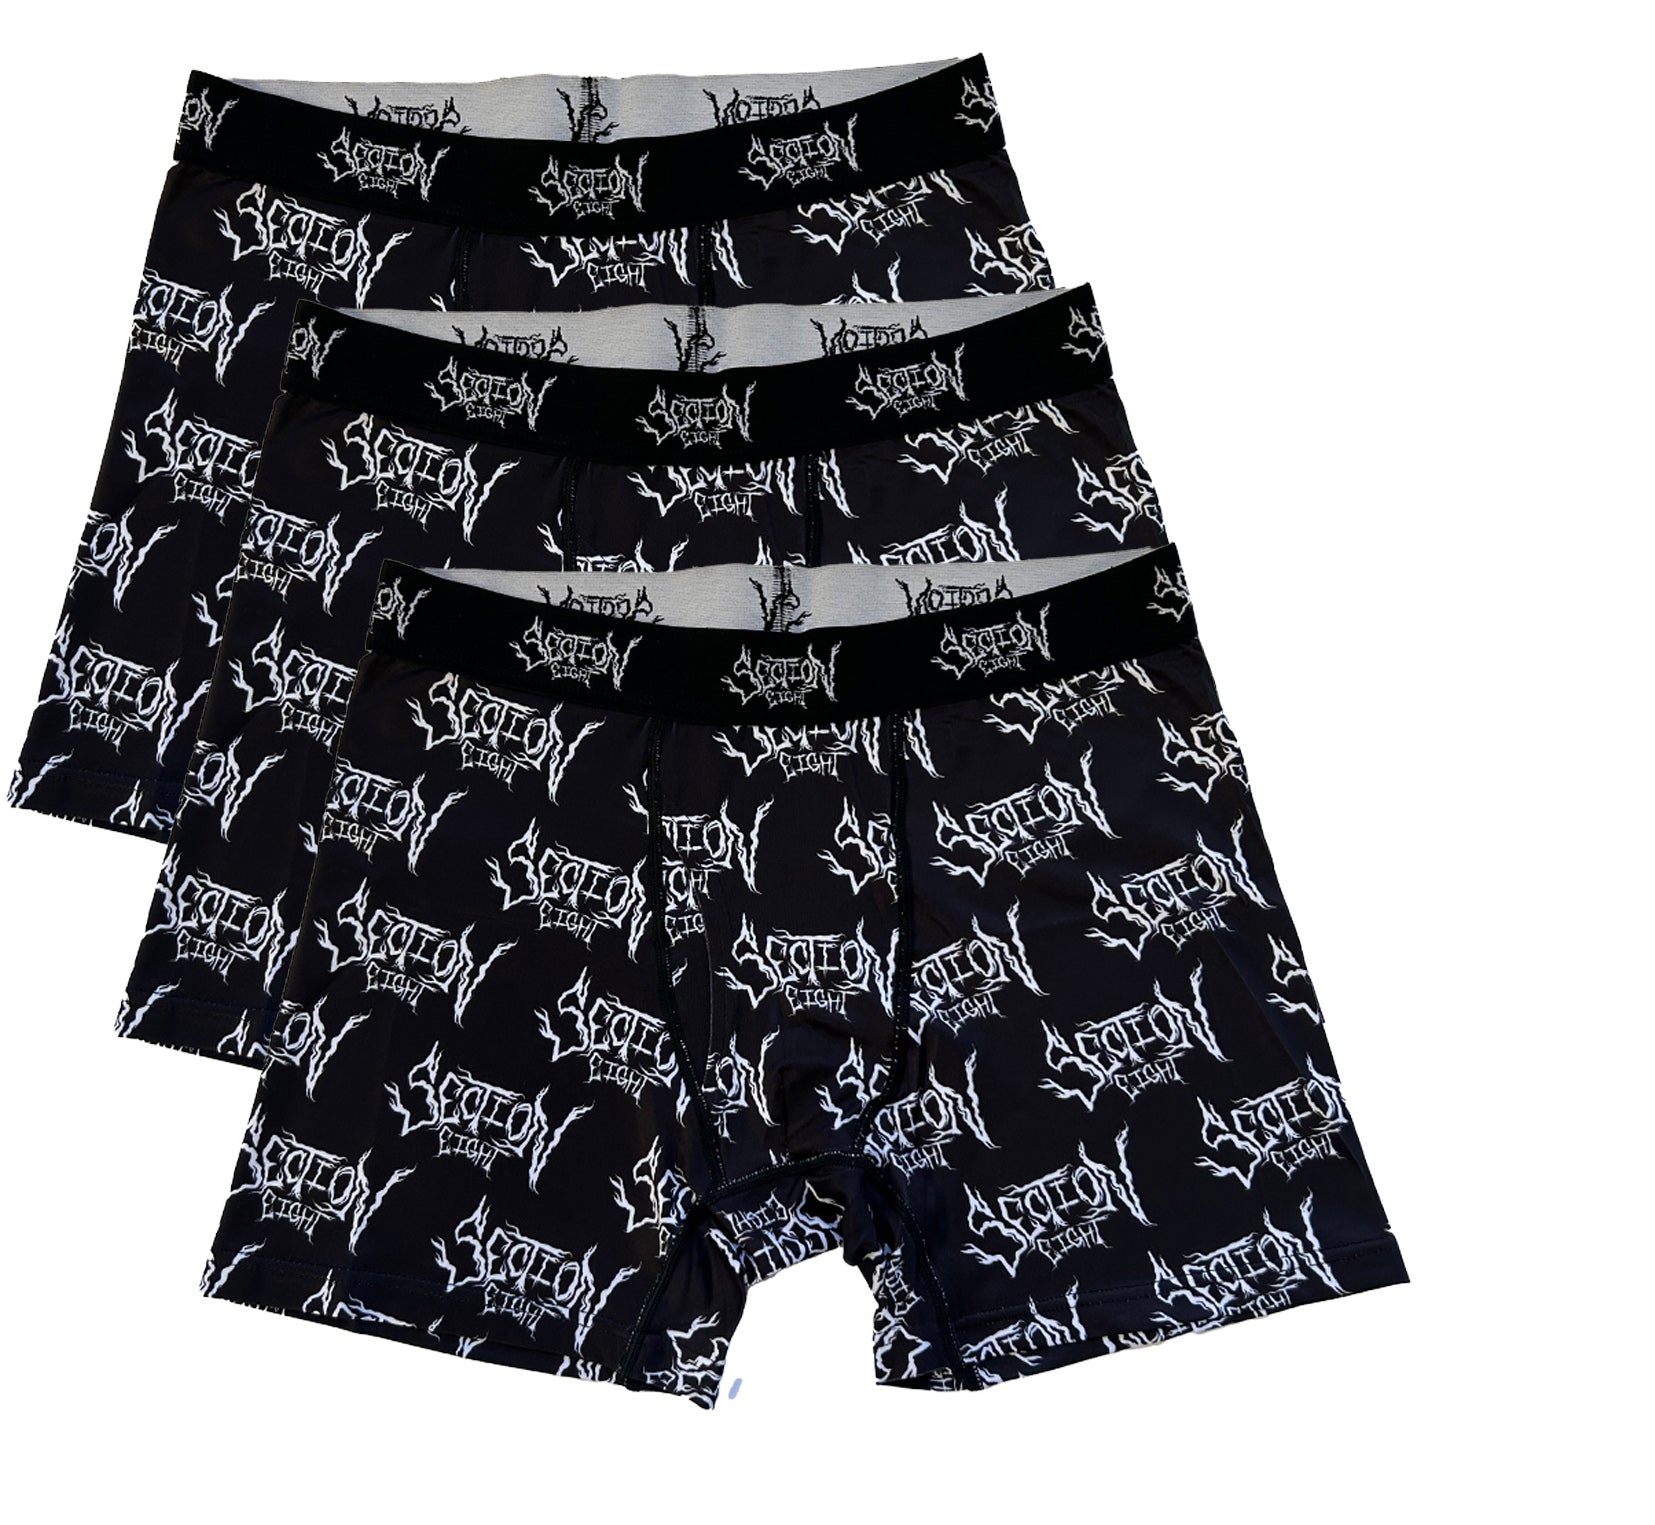 Section Eight (All OVER Boxers)